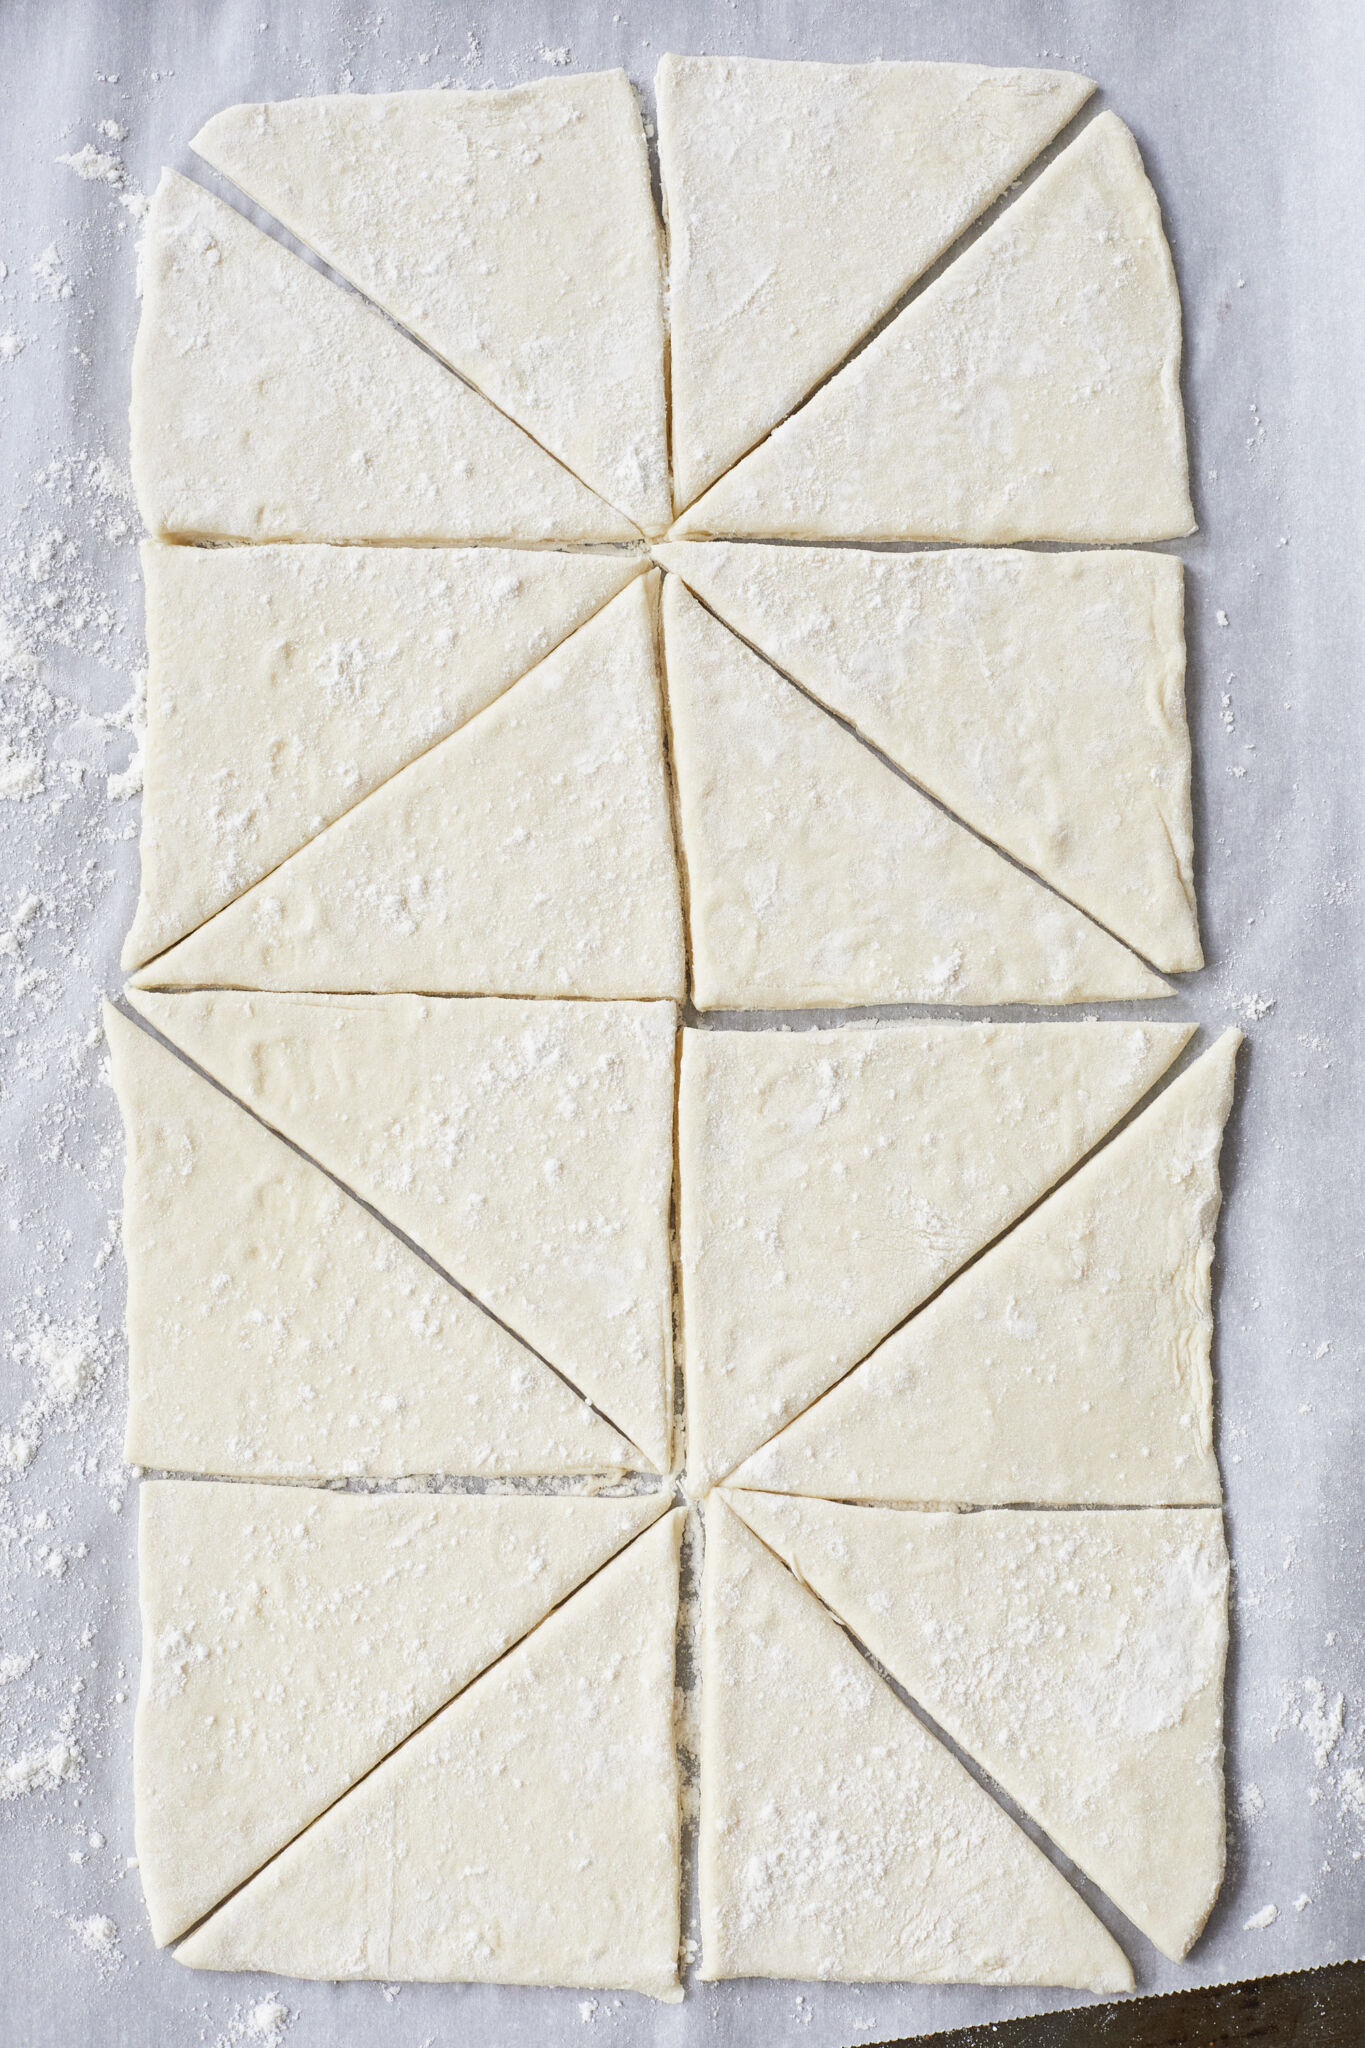 How to make the Rolls: Roll the prepared dough out into a big rectangular and cut it into 16 triangles,